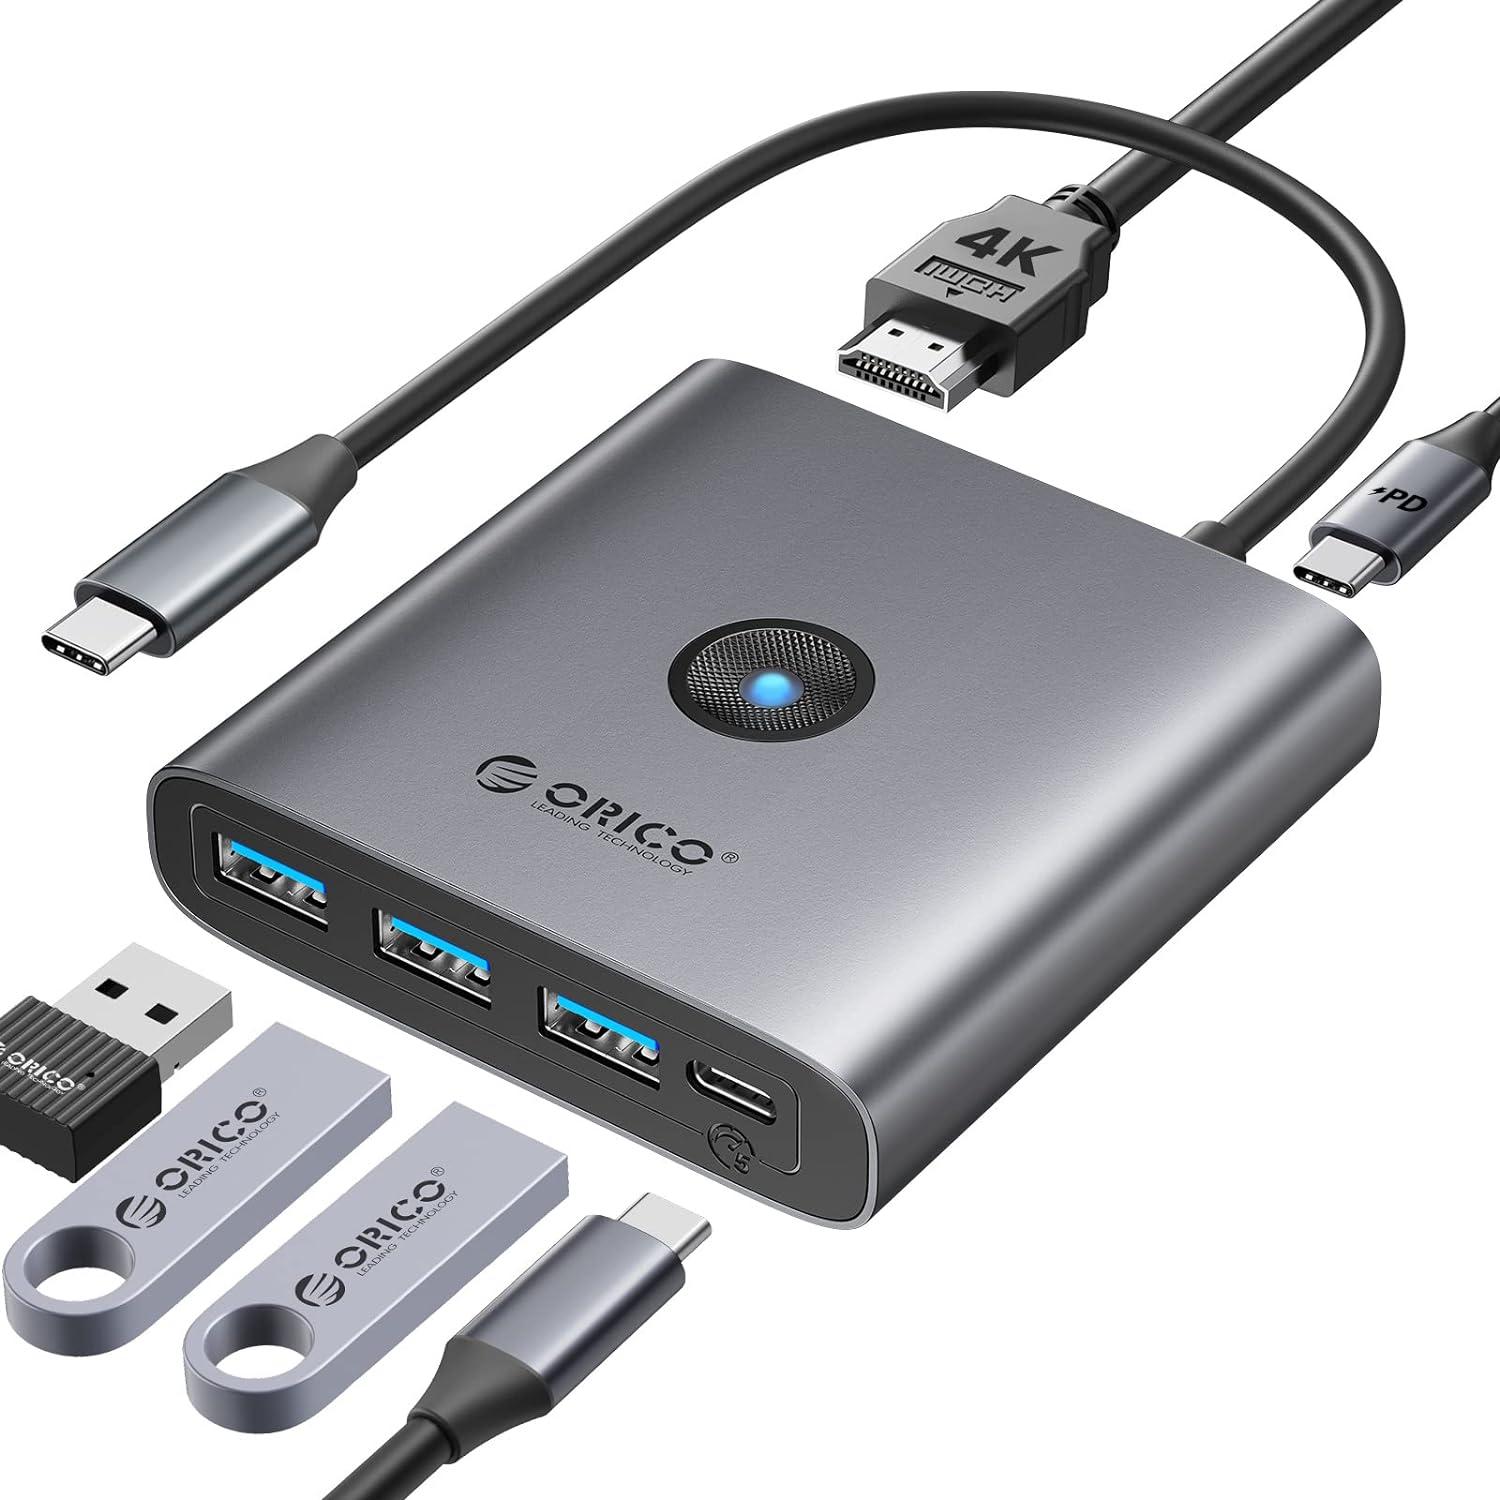 USB C 6-in-1 Hub with HDMI Docking Station for $13.94